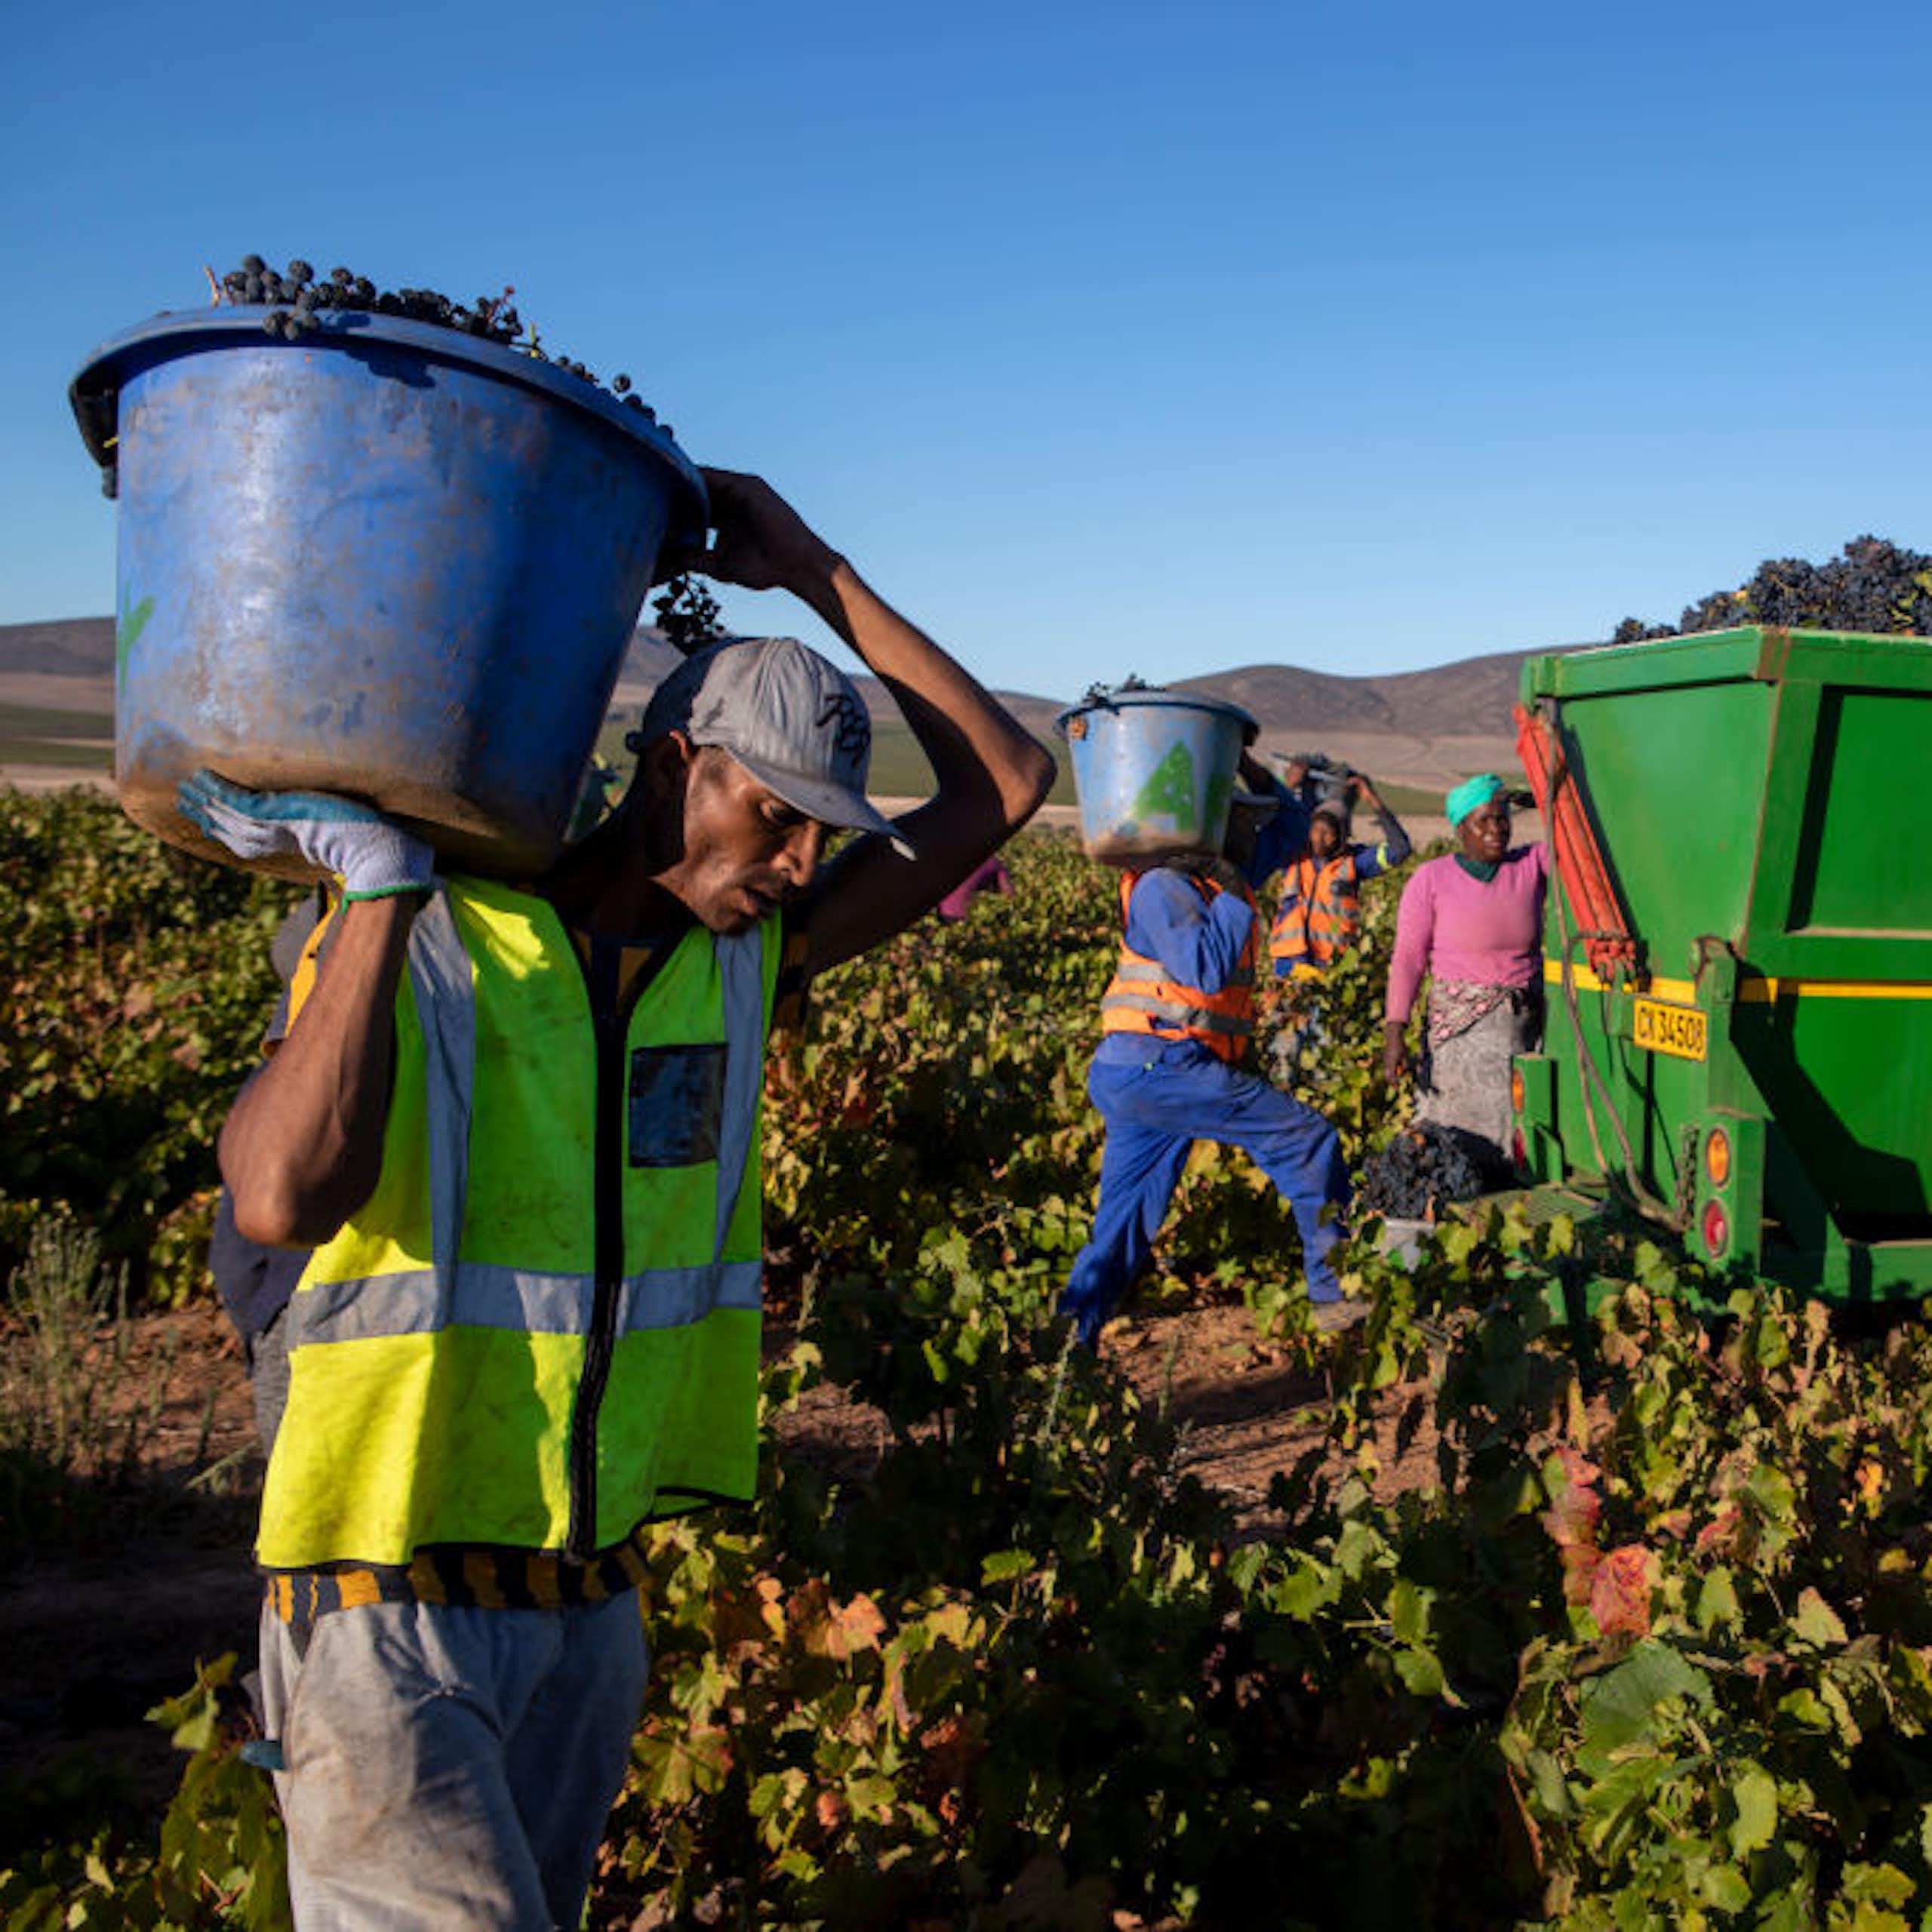 Minimum wage for South African farm workers: study shows 2013 hike helped reduce poverty even though compliance was poor